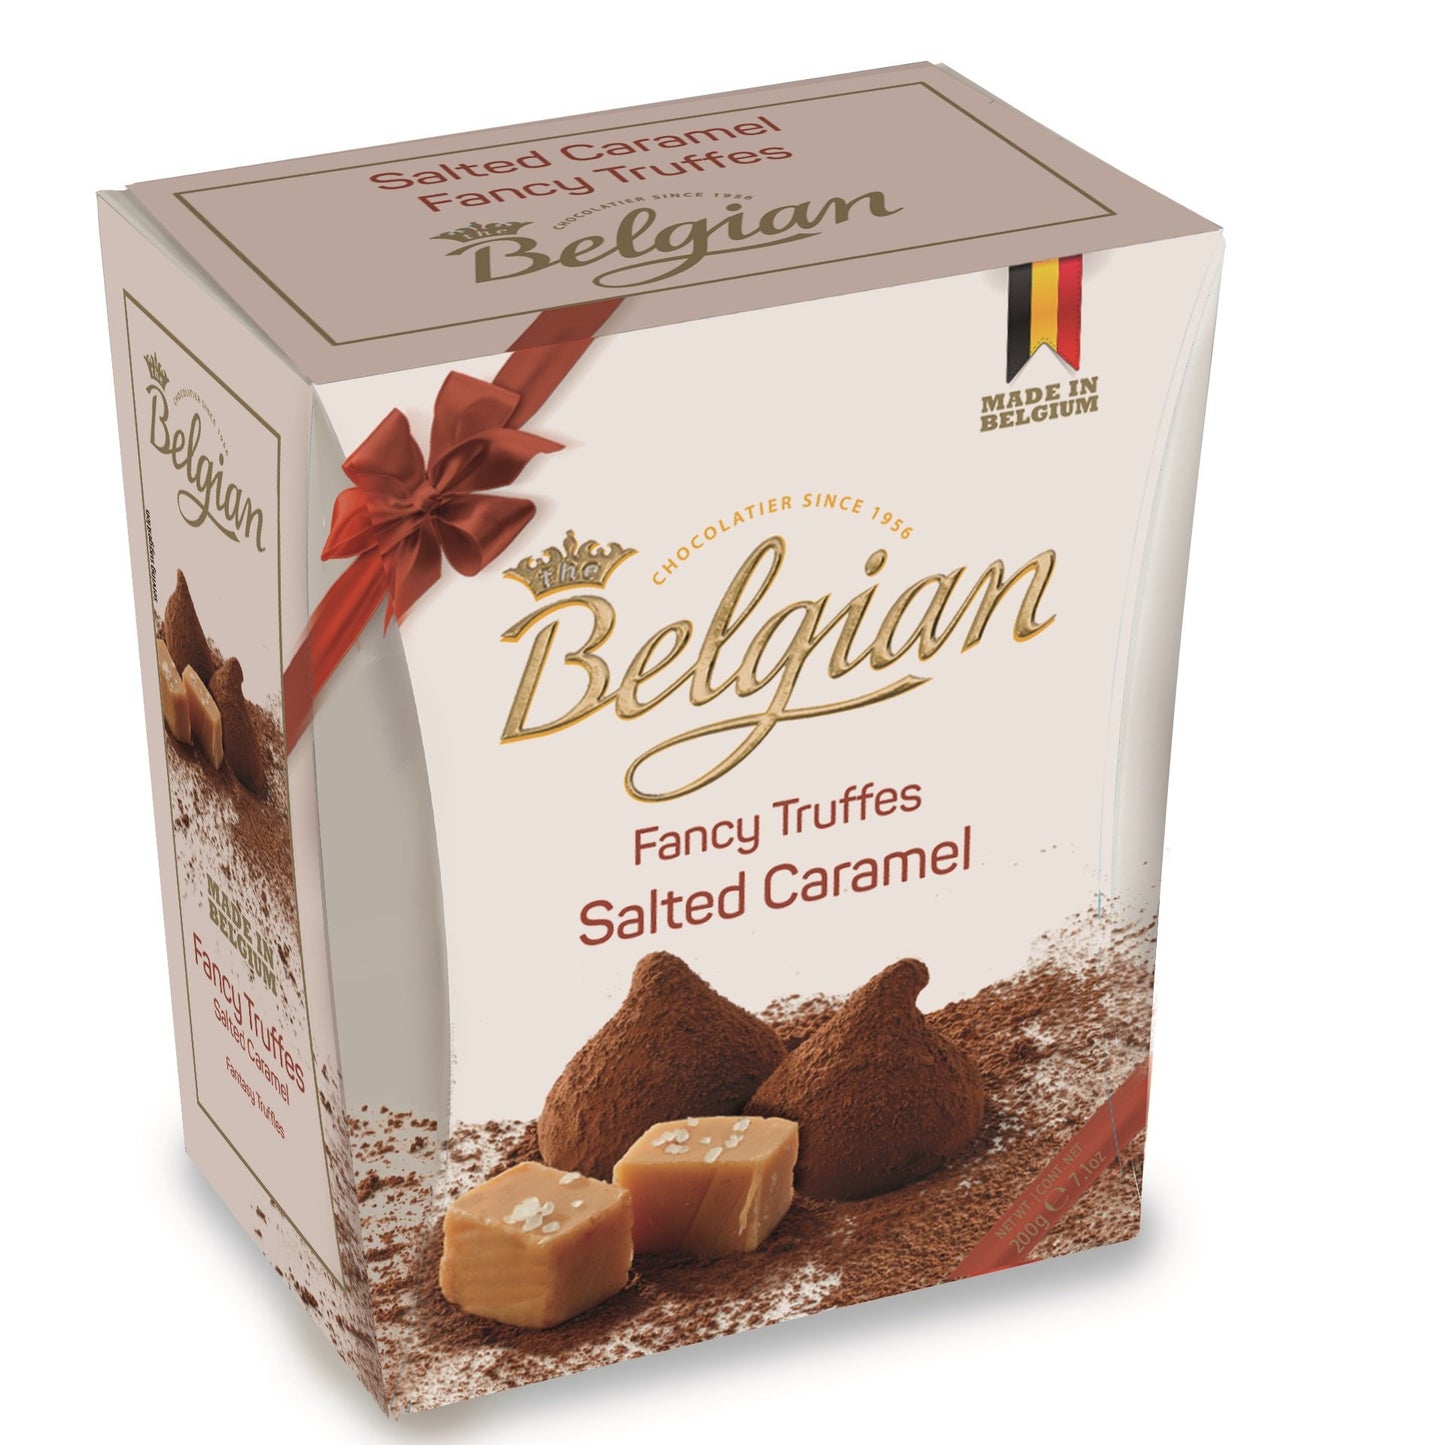 [The Belgian][Truffles][Cocoa Dusted Truffles with Salted Caramel]